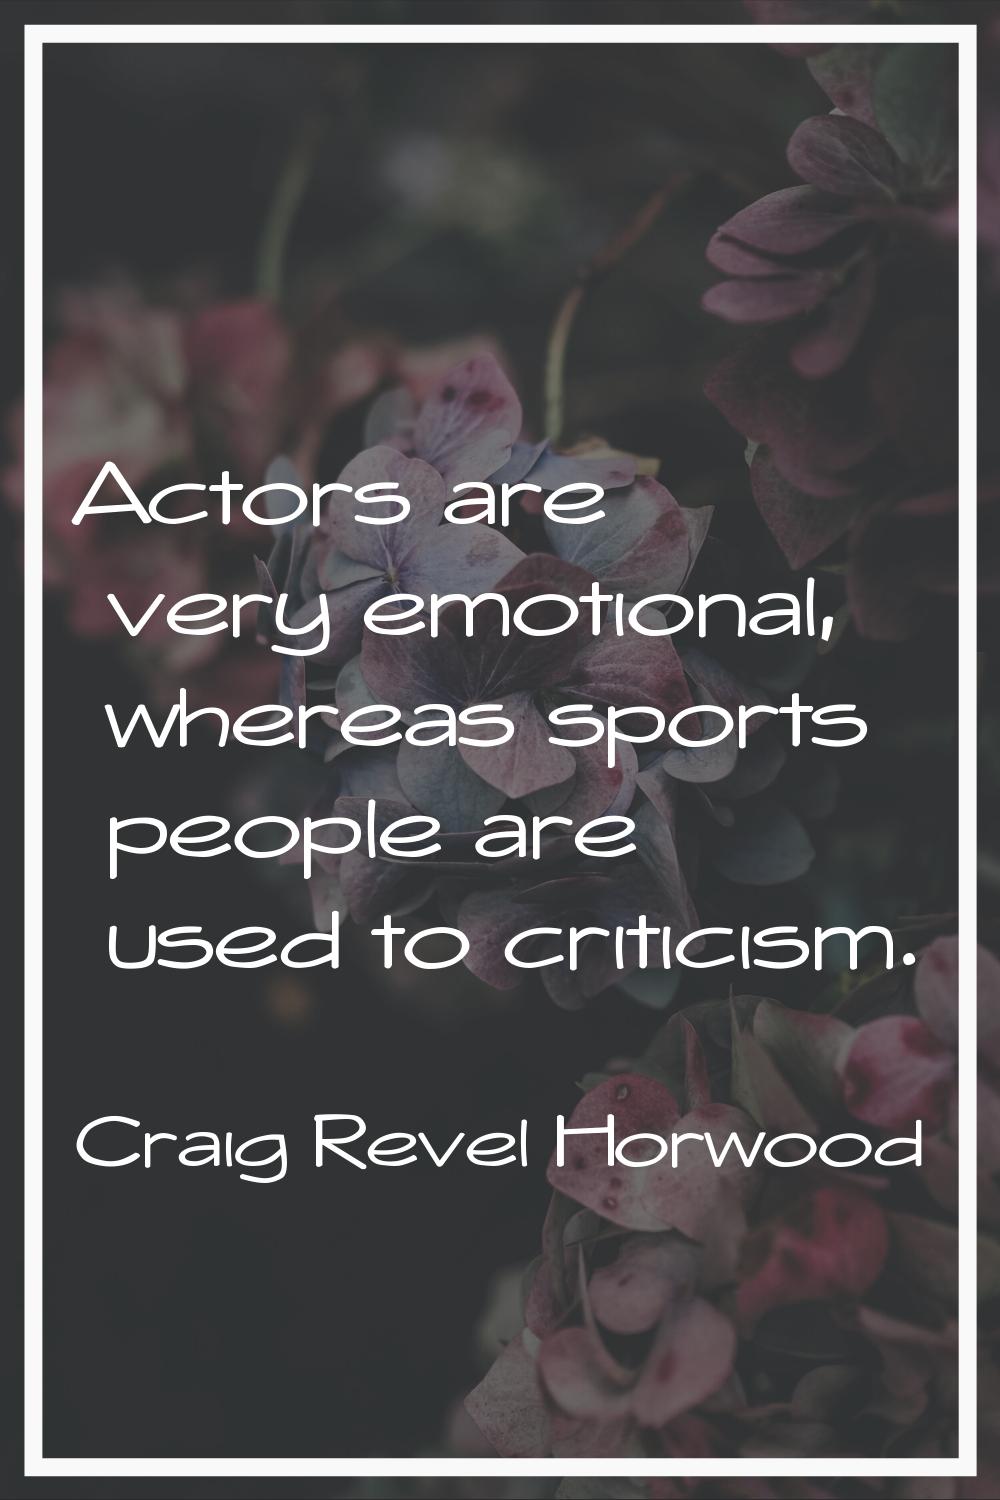 Actors are very emotional, whereas sports people are used to criticism.